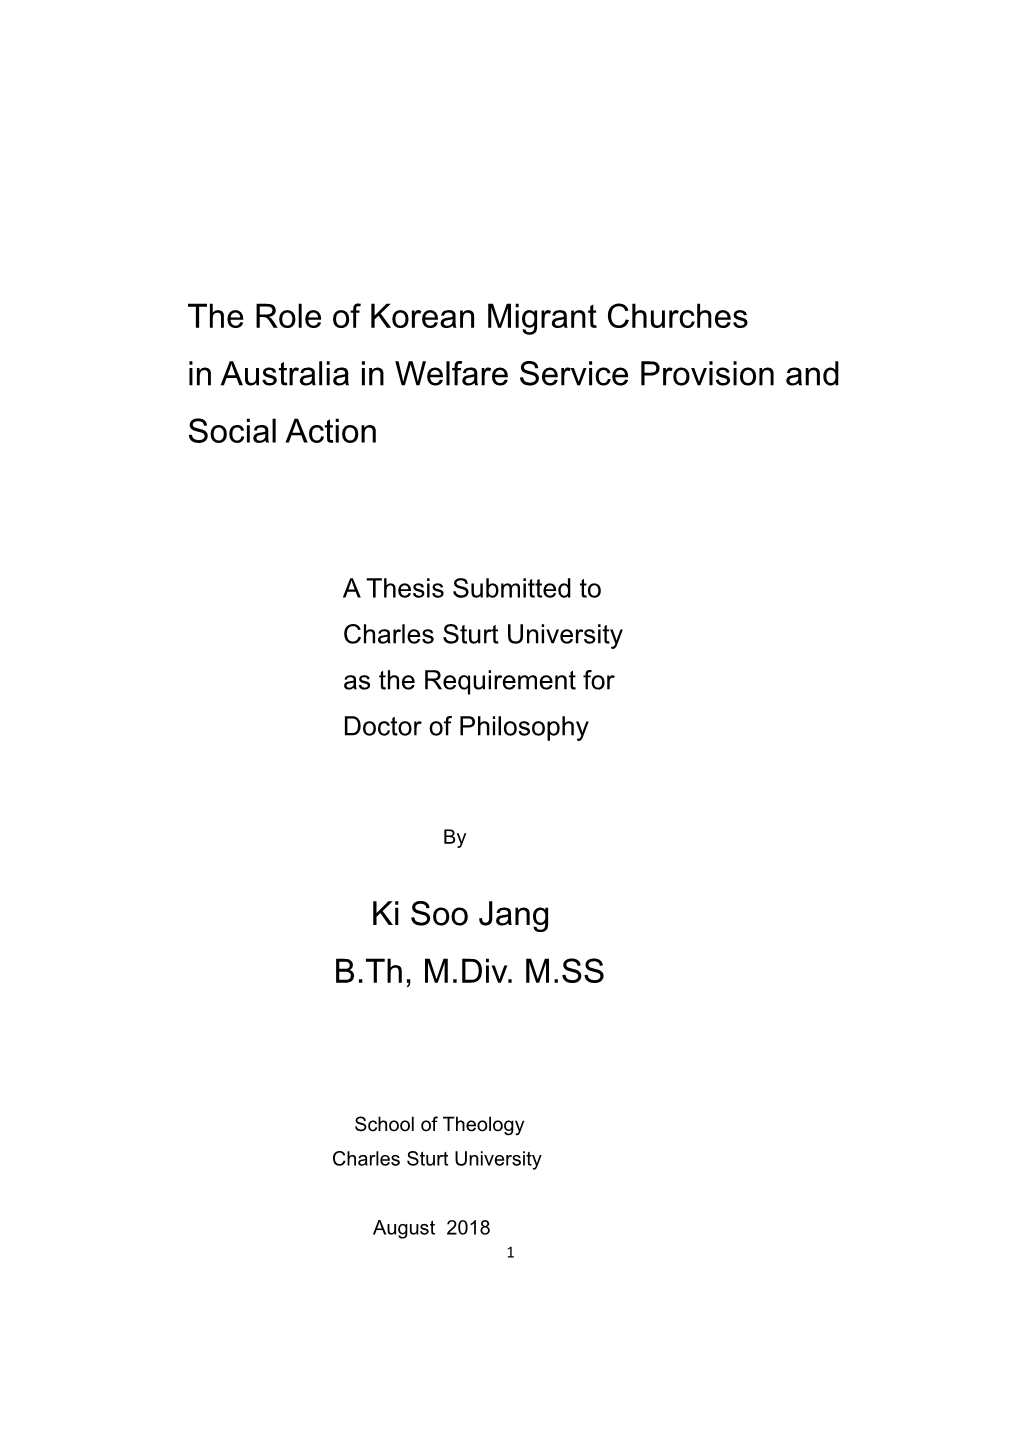 The Role of Korean Migrant Churches in Australia in Welfare Service Provision and Social Action